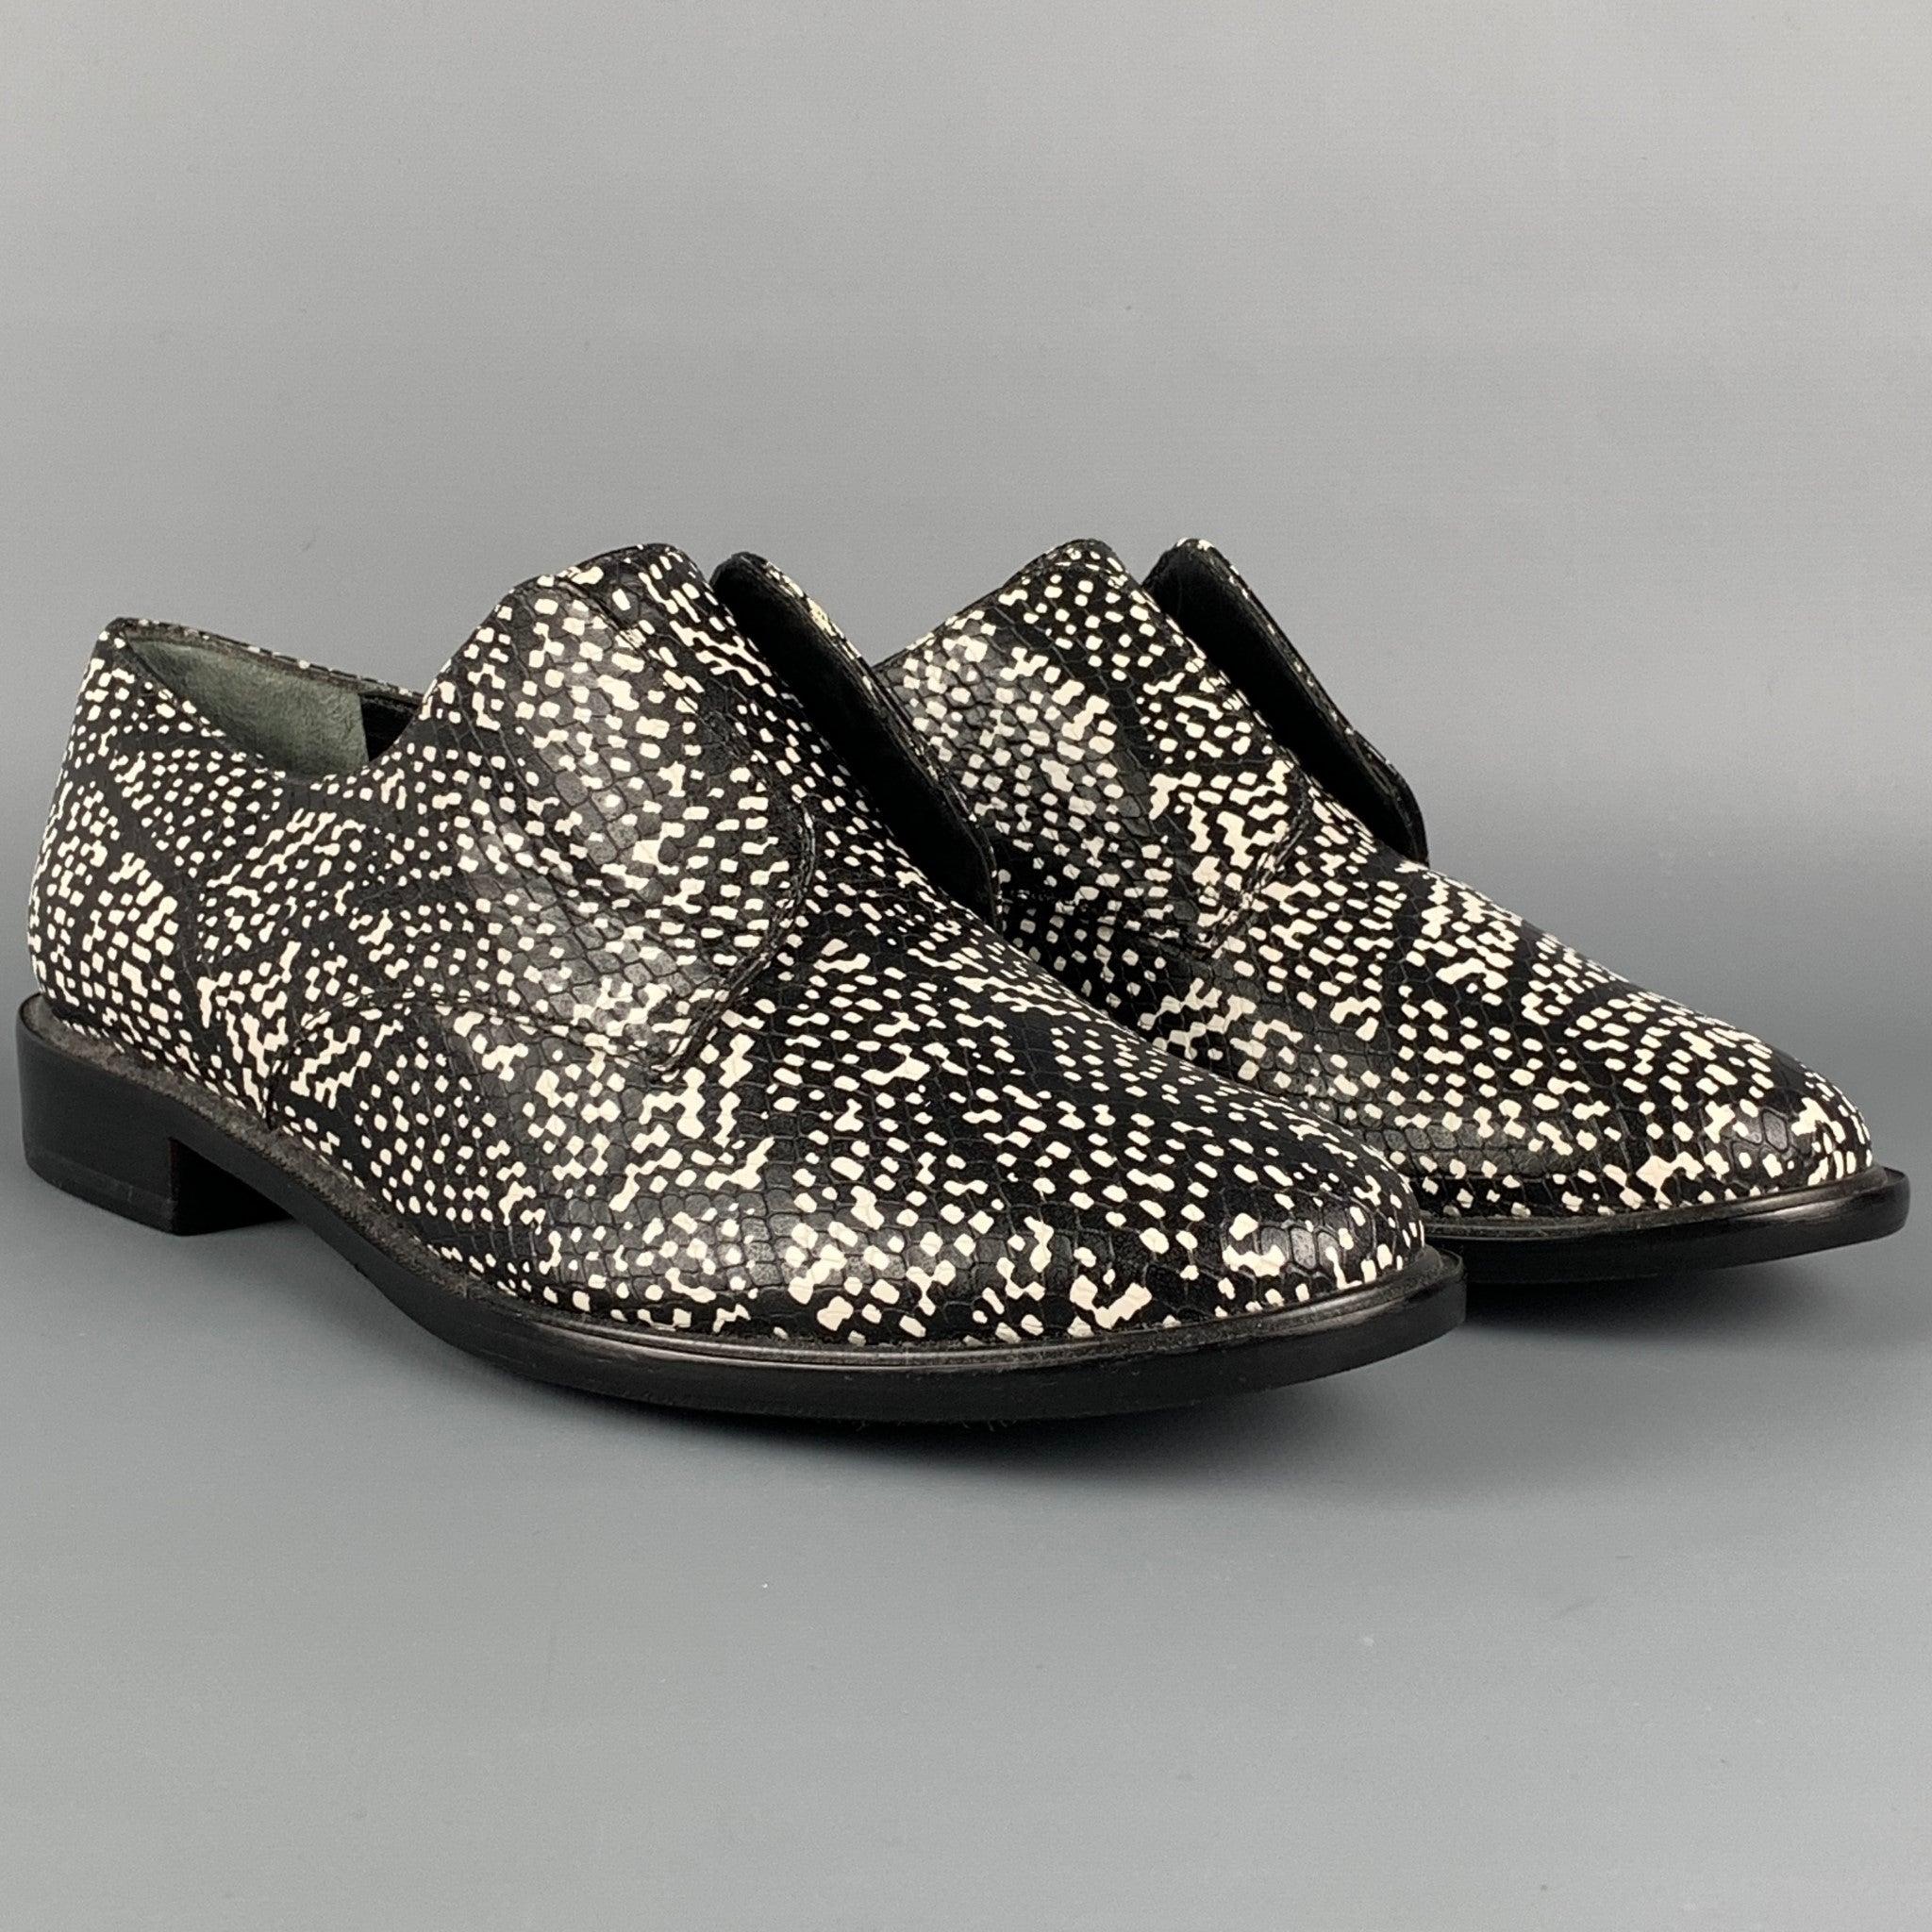 ROBERT CLERGERIE shoes comes in a black & white print leather featuring a laceless style. Made in France.
Very Good
Pre-Owned Condition. 

Marked:   37.5 B 04 7007 25Outsole: 10.5 inches  x 3.75 inches 
  
  
 
Reference: 114837
Category: Laces
More